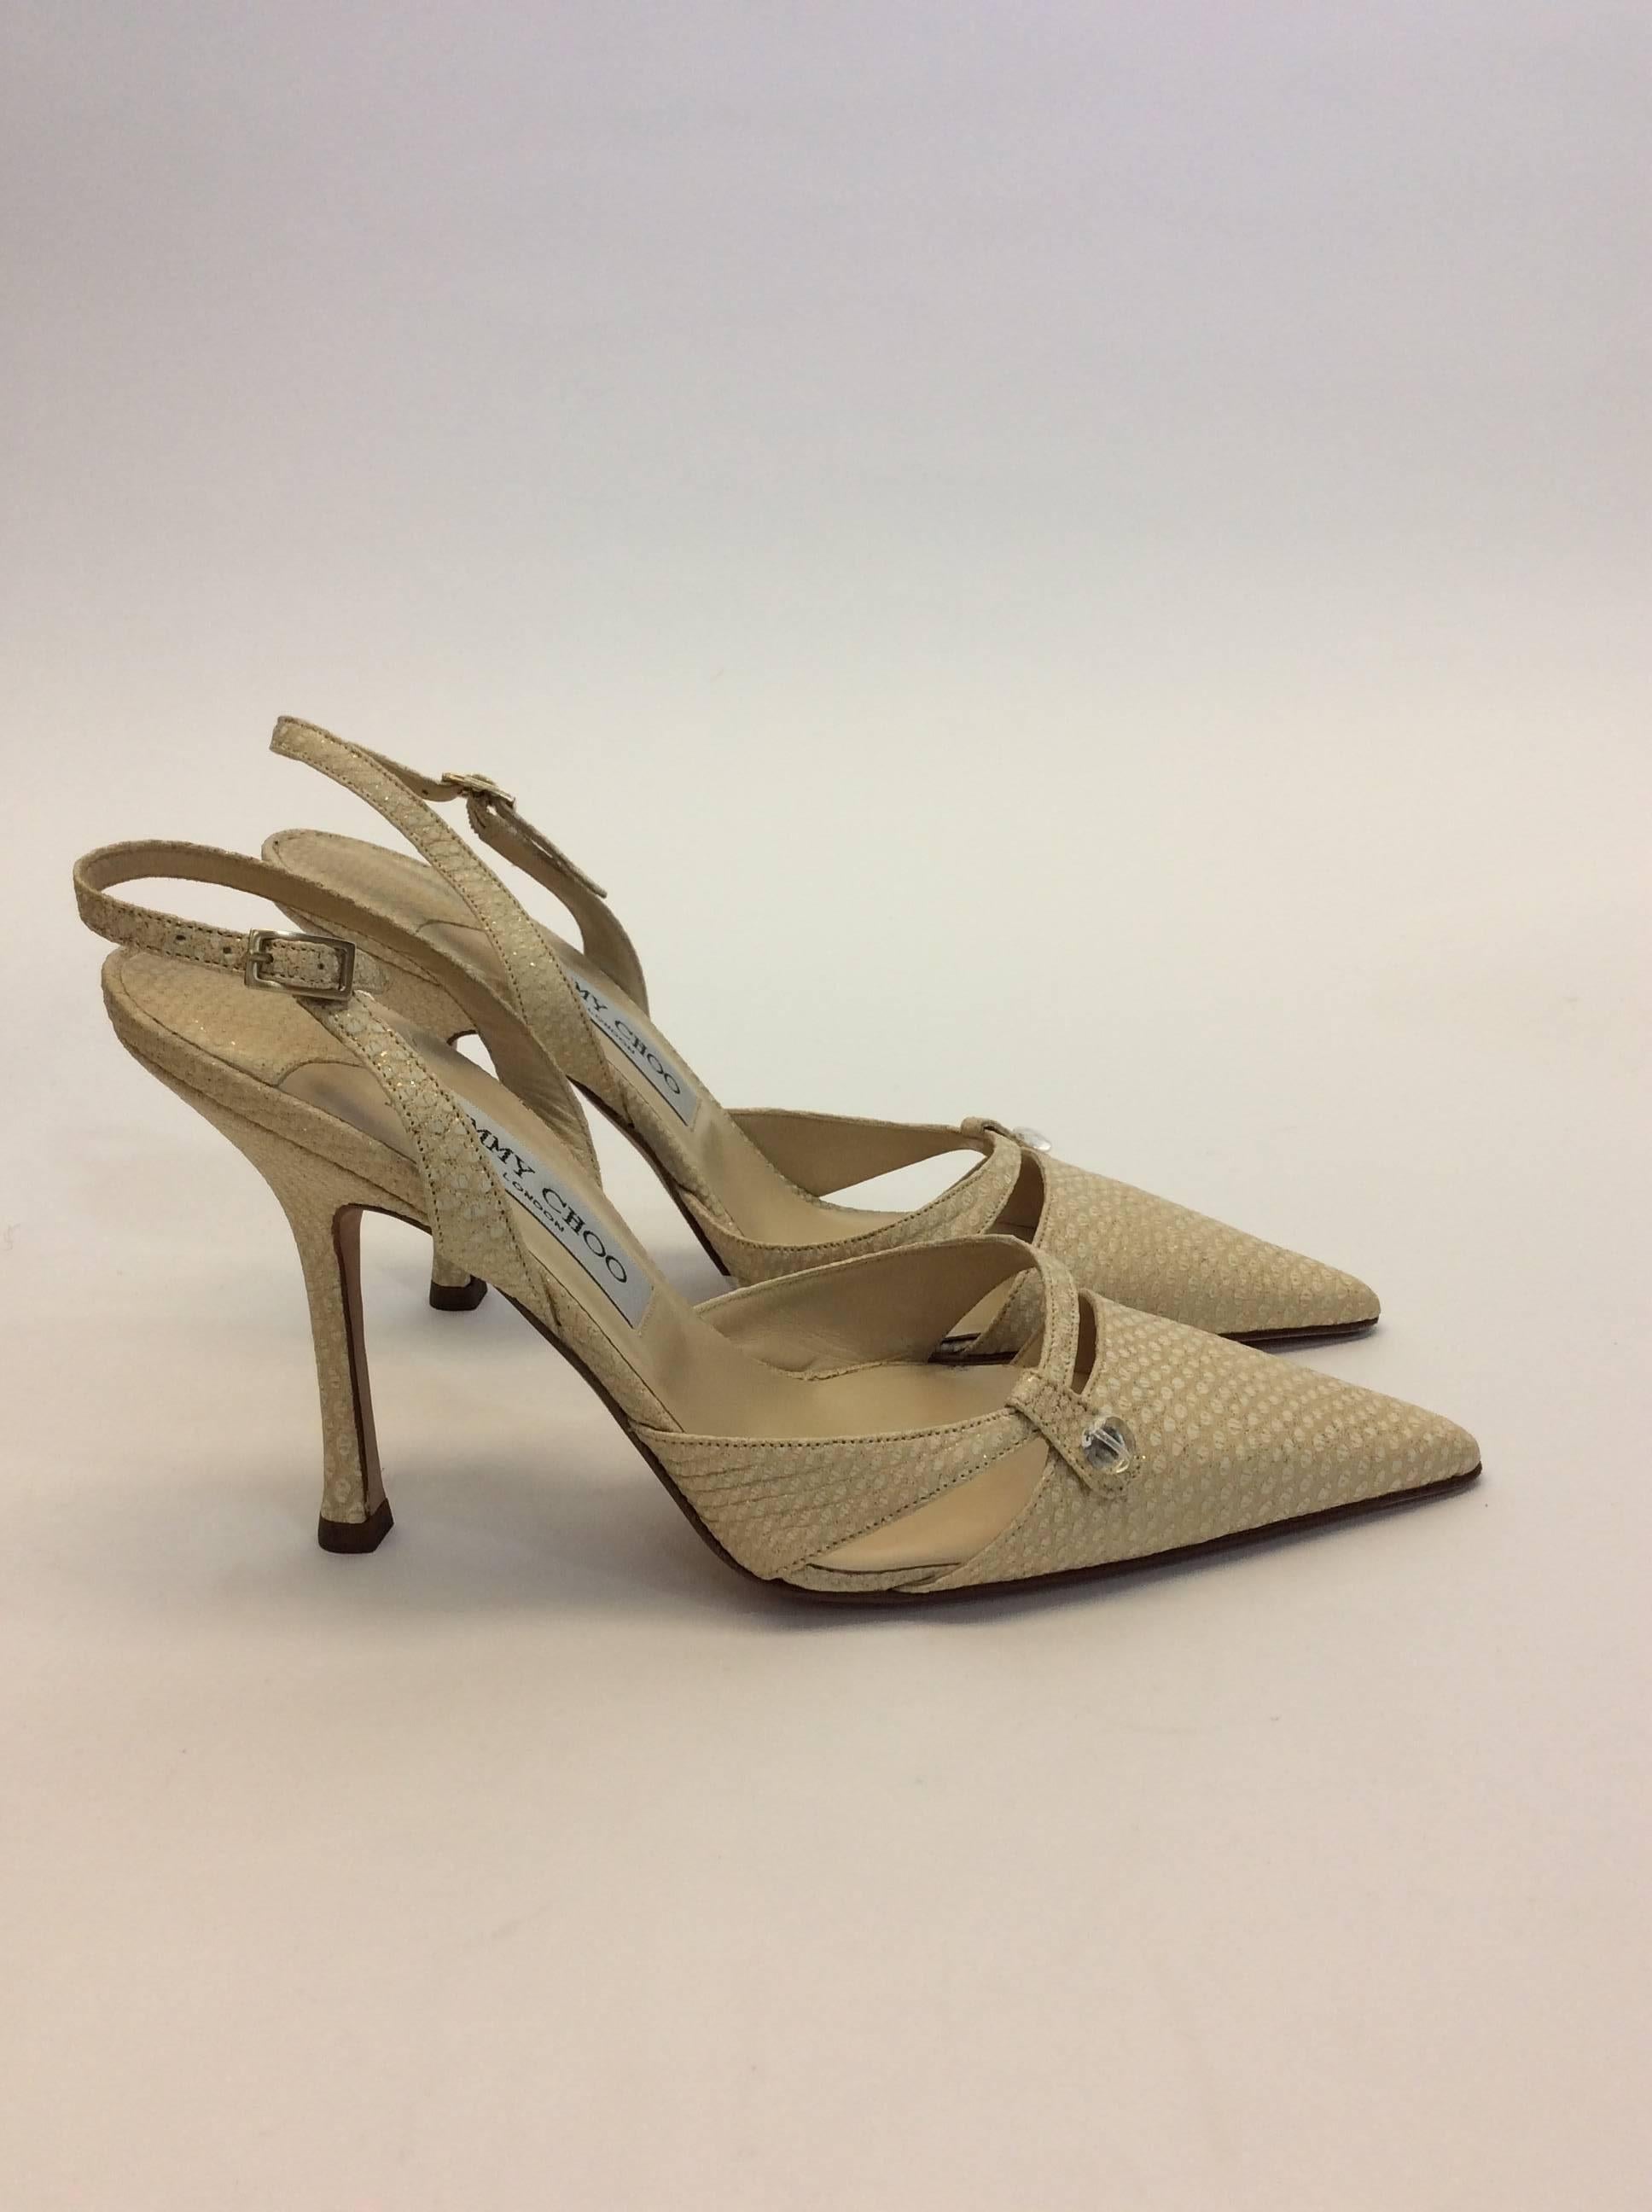 Jimmy Choo Canvas Snake Skin Print Slingback Pump In Excellent Condition For Sale In Narberth, PA